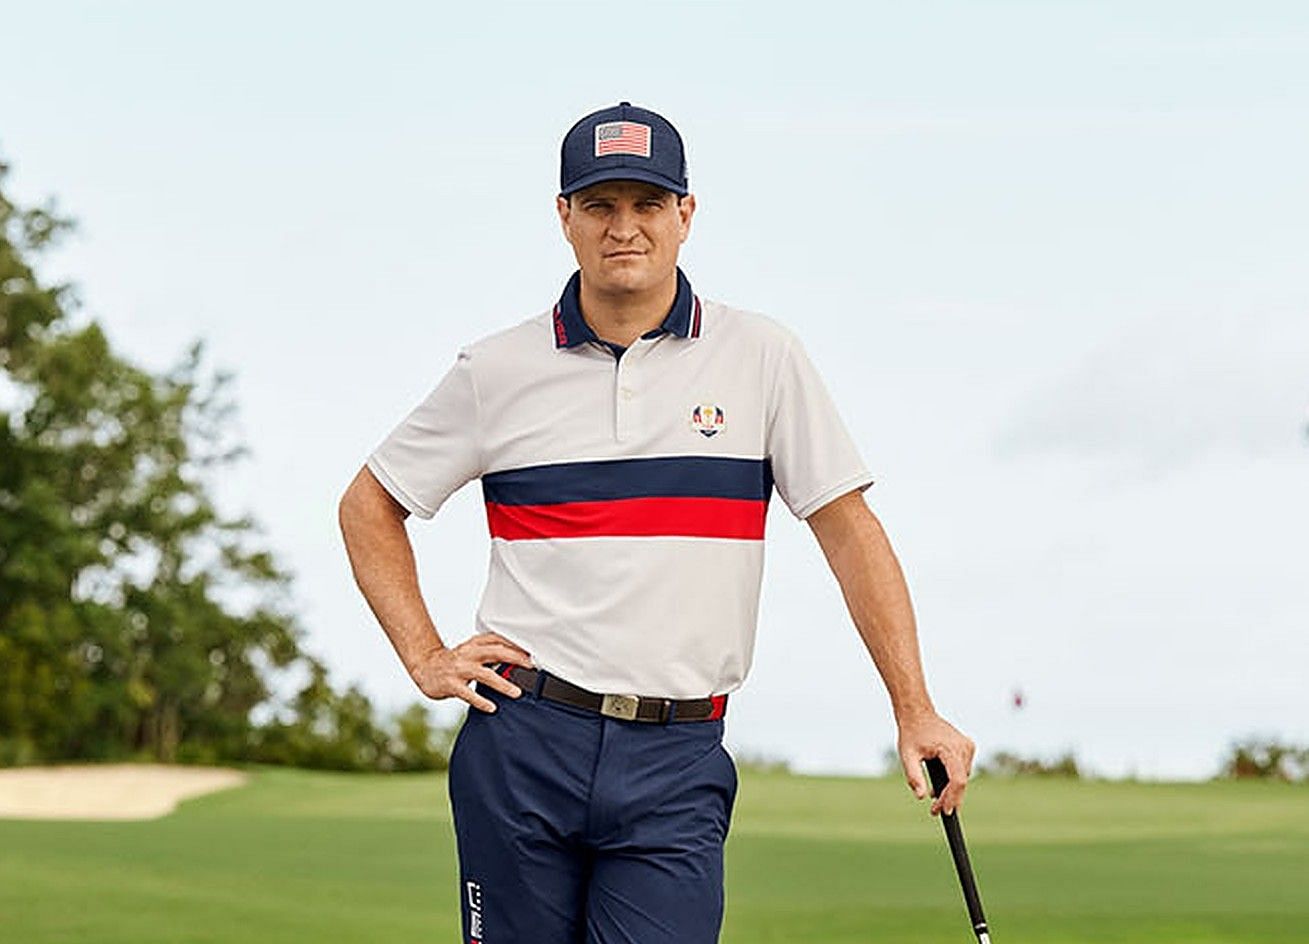 USA Team Saturday Ryder Cup outfit (Image via Ralph Lauren)